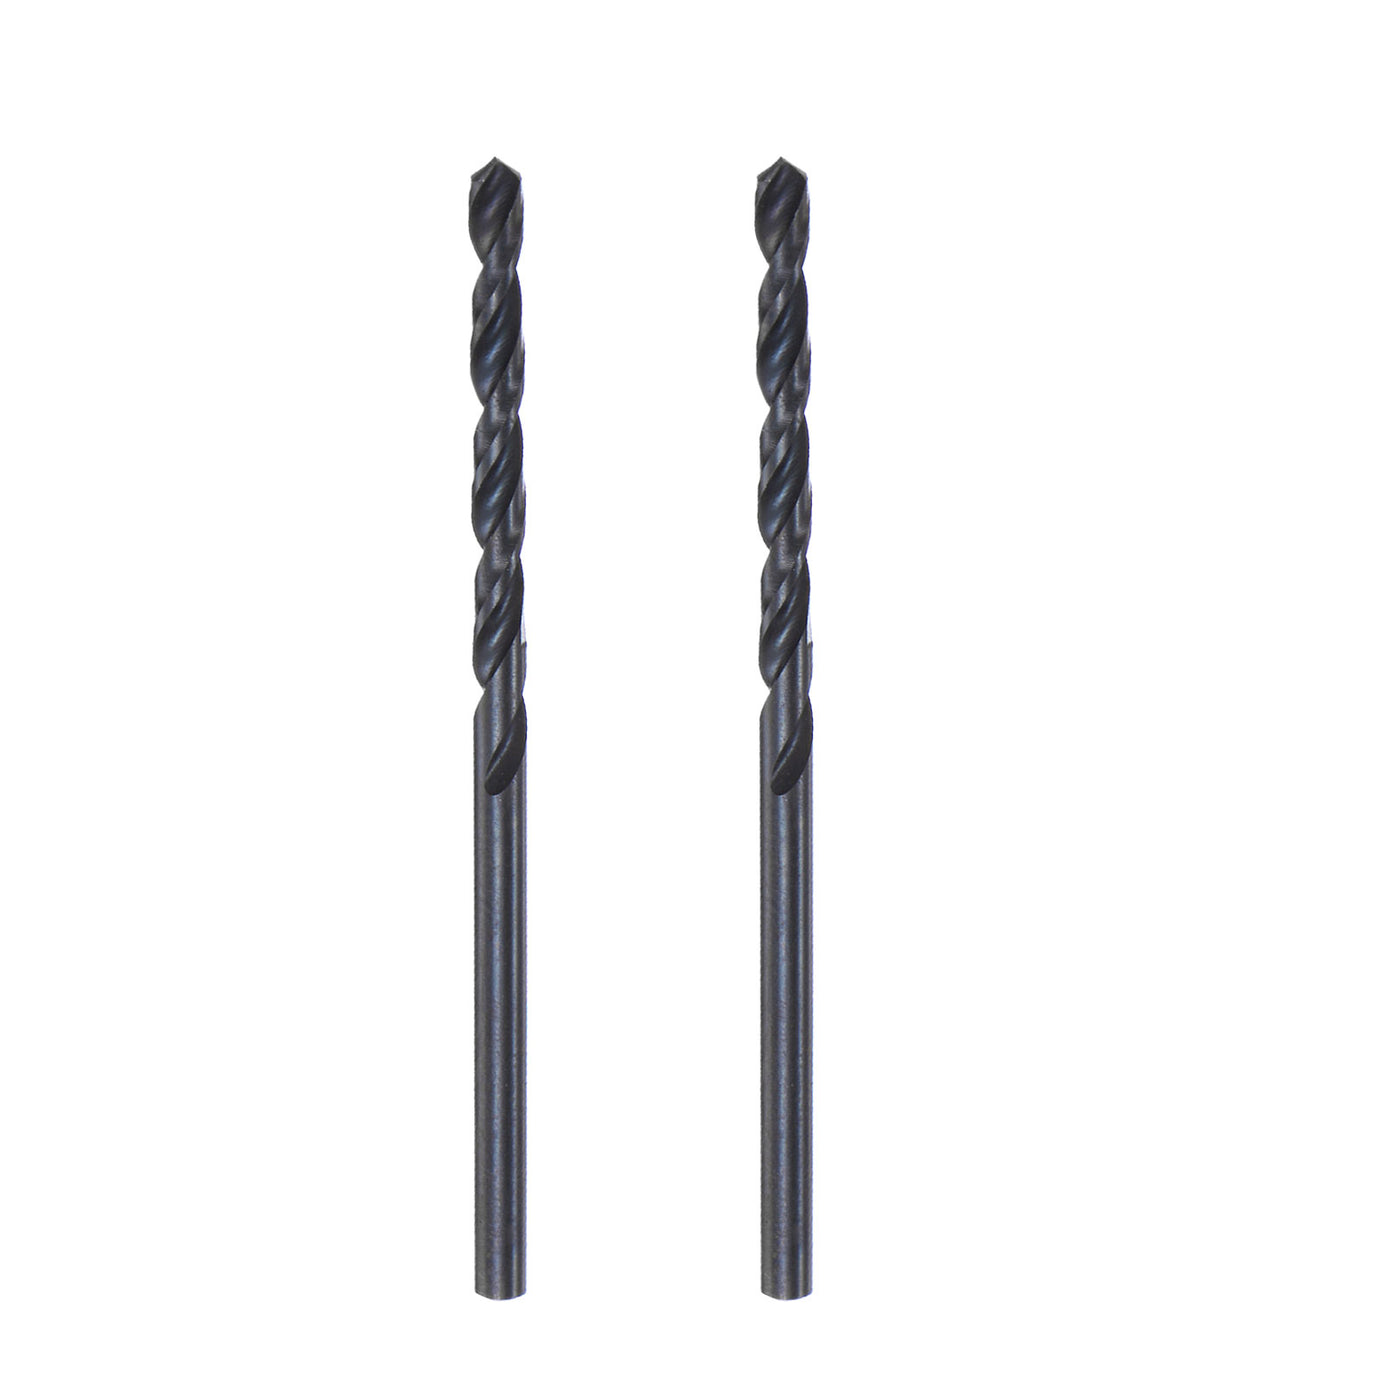 uxcell Uxcell High Speed Steel Twist Drill Bit, 2.6mm Fully Ground Black Oxide 57mm Long 2Pcs